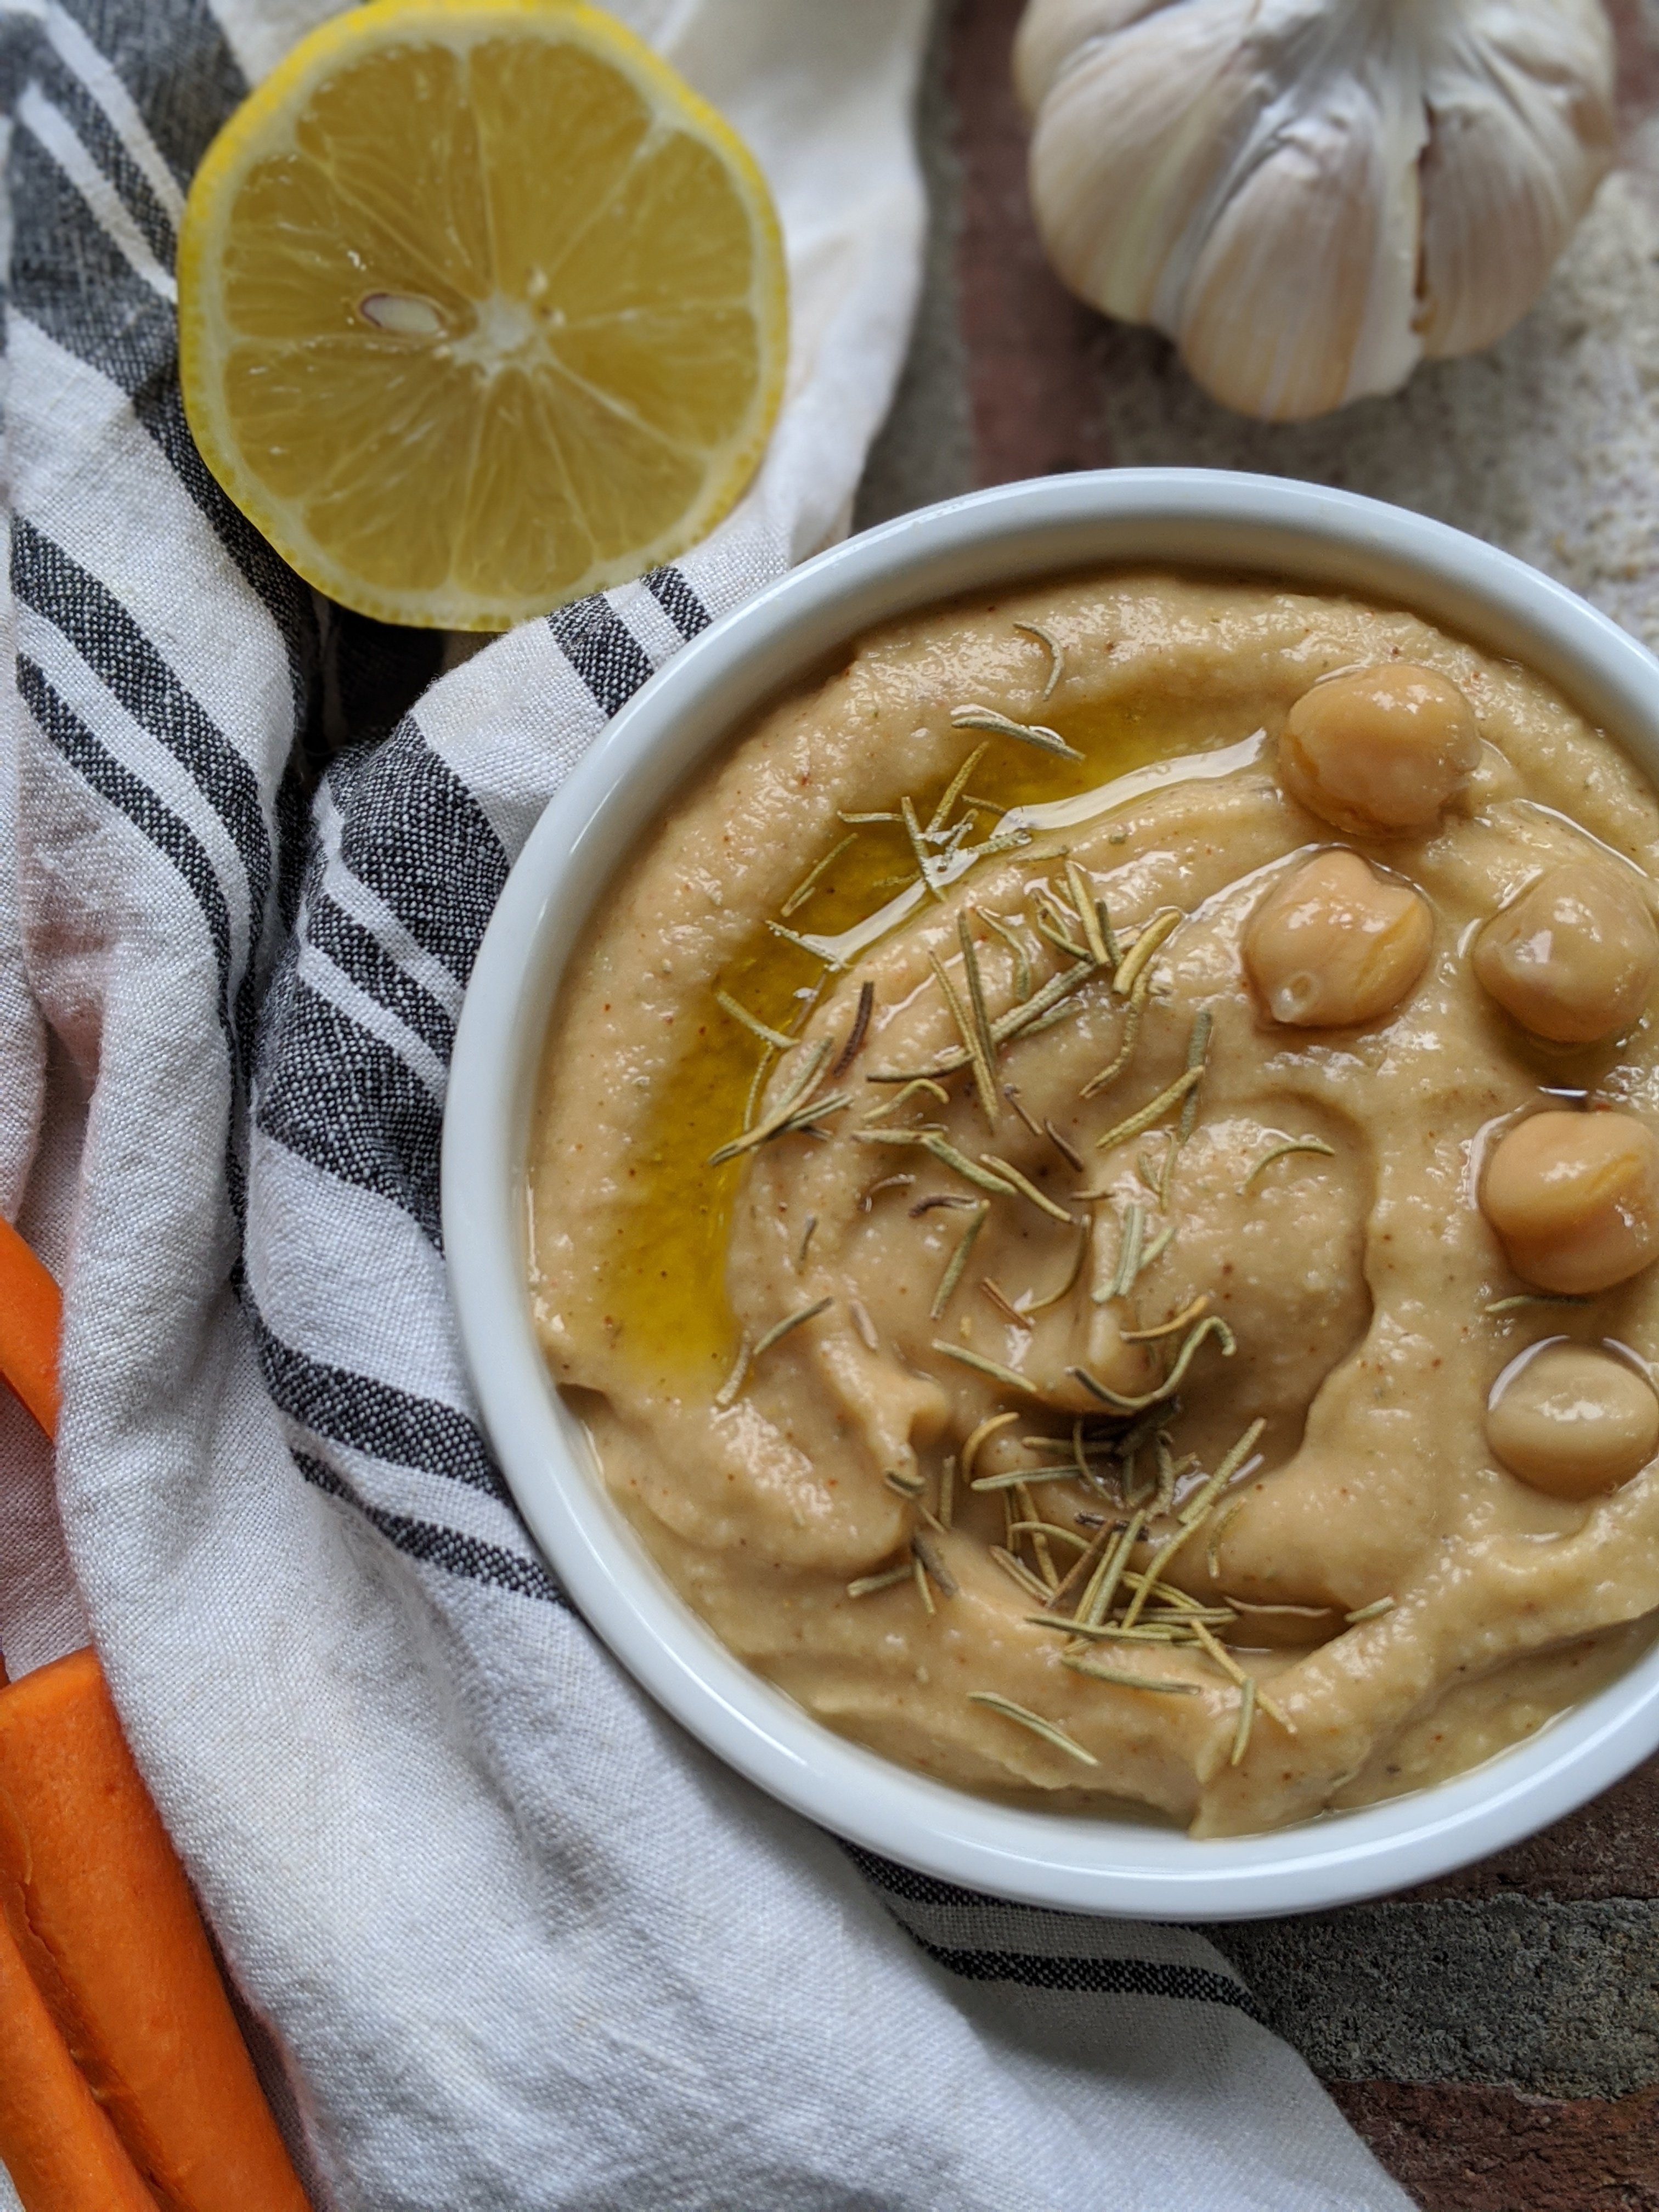 garlic lemon hummus recipe with rosemary healthy fresh lemon canned chickpeas hummous from scratch recipe 